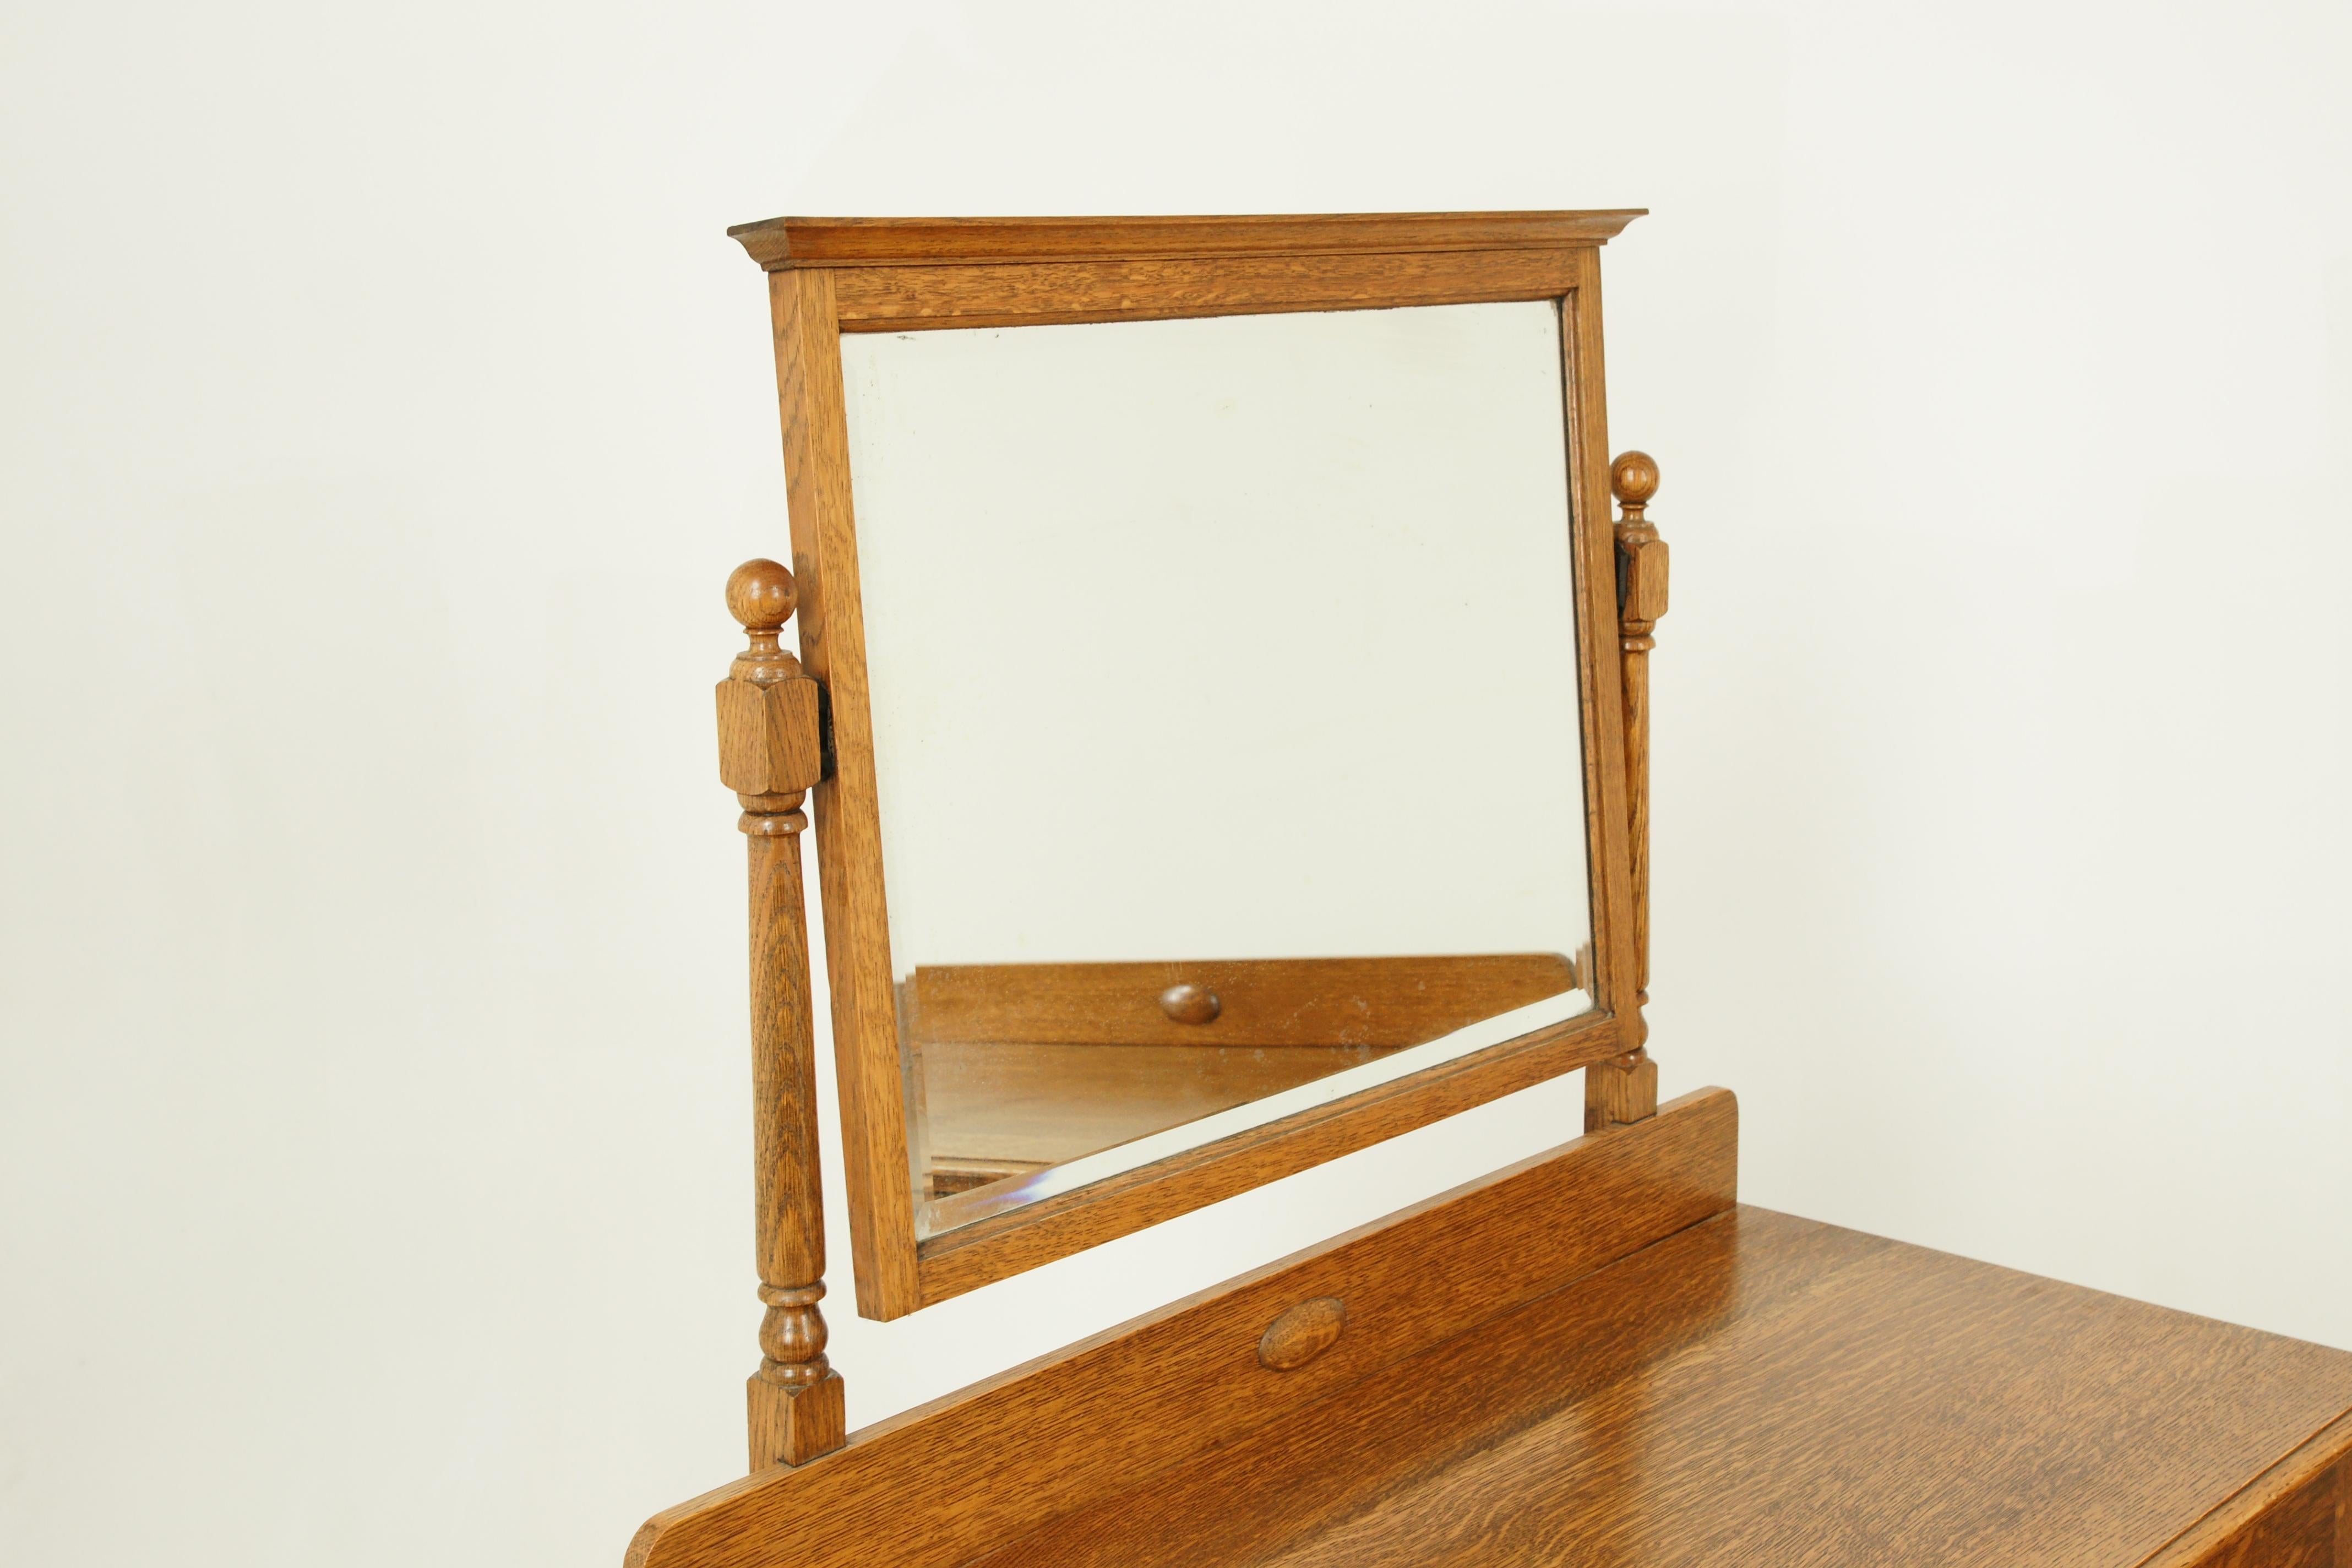 Antique vanity, antique dresser, beveled mirror, tiger oak, Scotland, 1930, antique furniture

Scotland, 1930
Solid oak construction
Recently refinished
Mirror above tilts forward and backwards
Molded top
Below are three-dovetailed drawers with